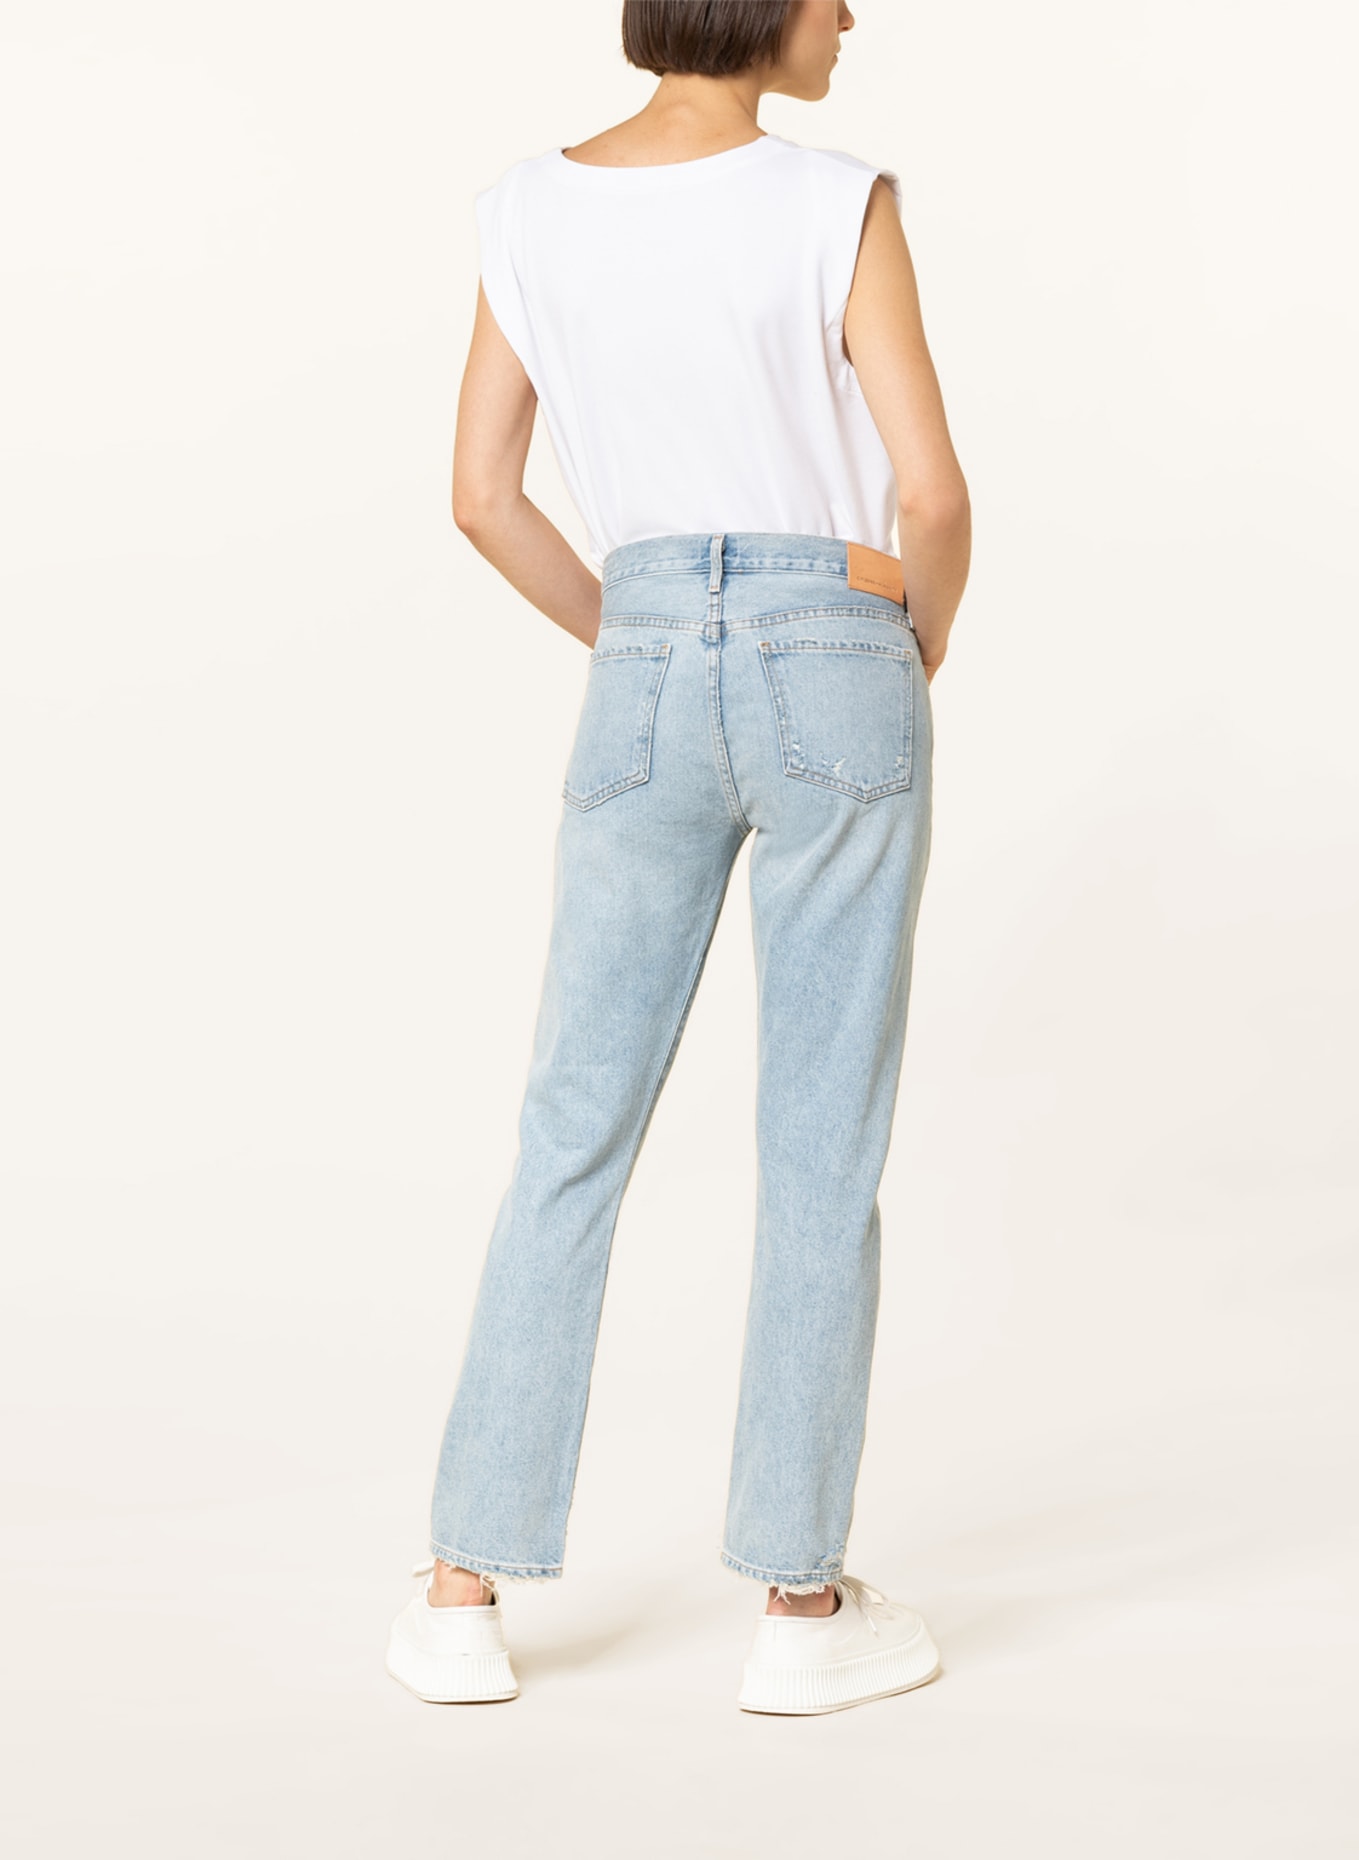 CITIZENS of HUMANITY Boyfriend jeans EMERSON , Color: Night Cap lt ind w/damage (Image 3)